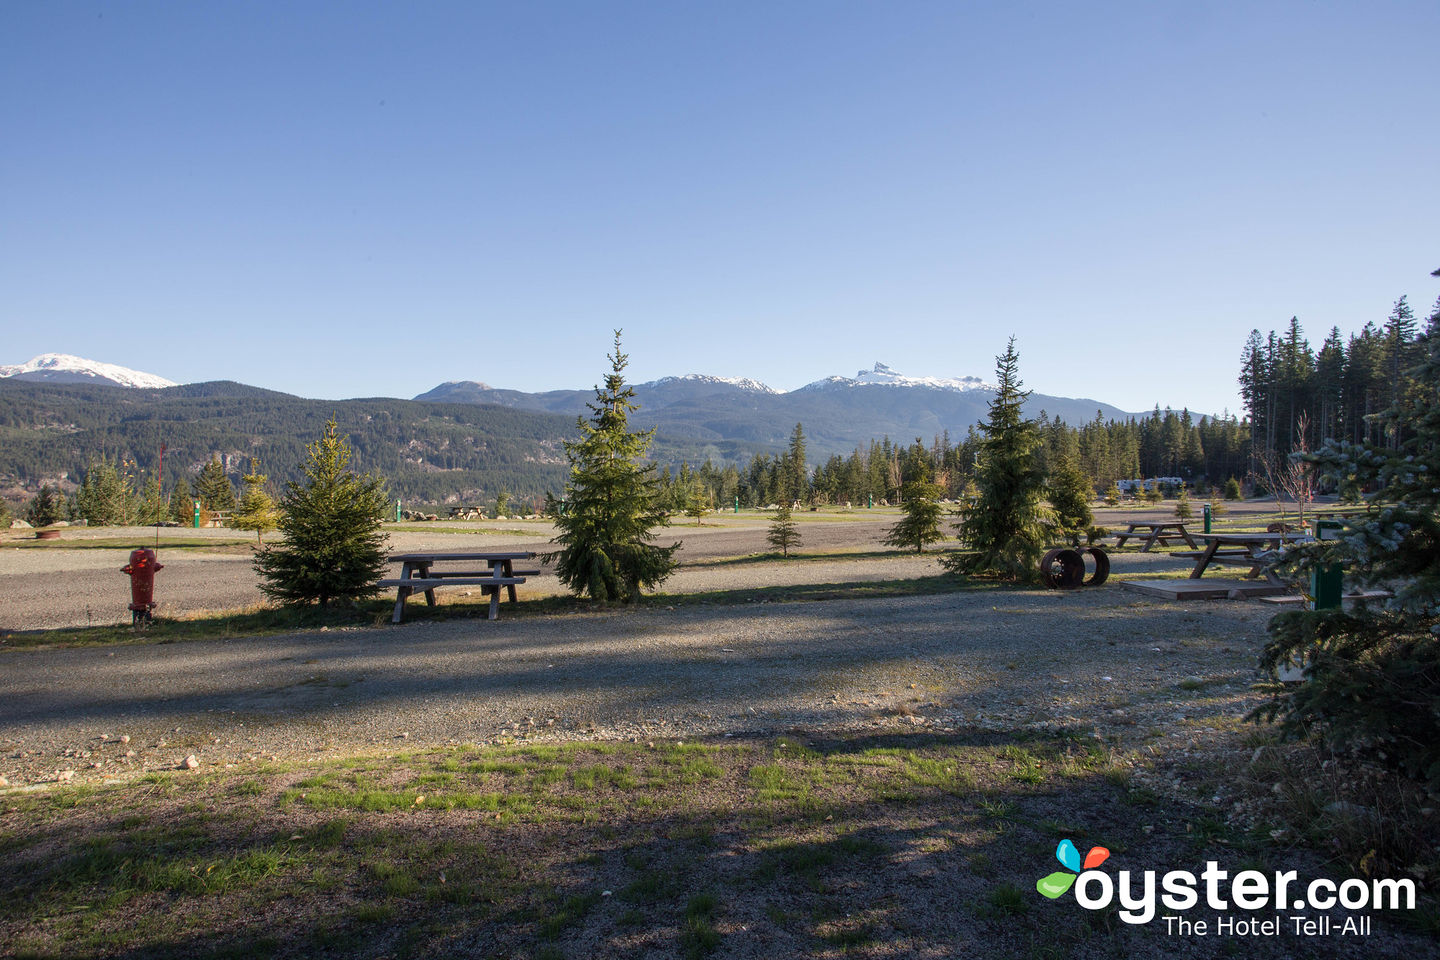 Whistler Rv Park & Campgrounds Review: What To Really Expect If You Stay